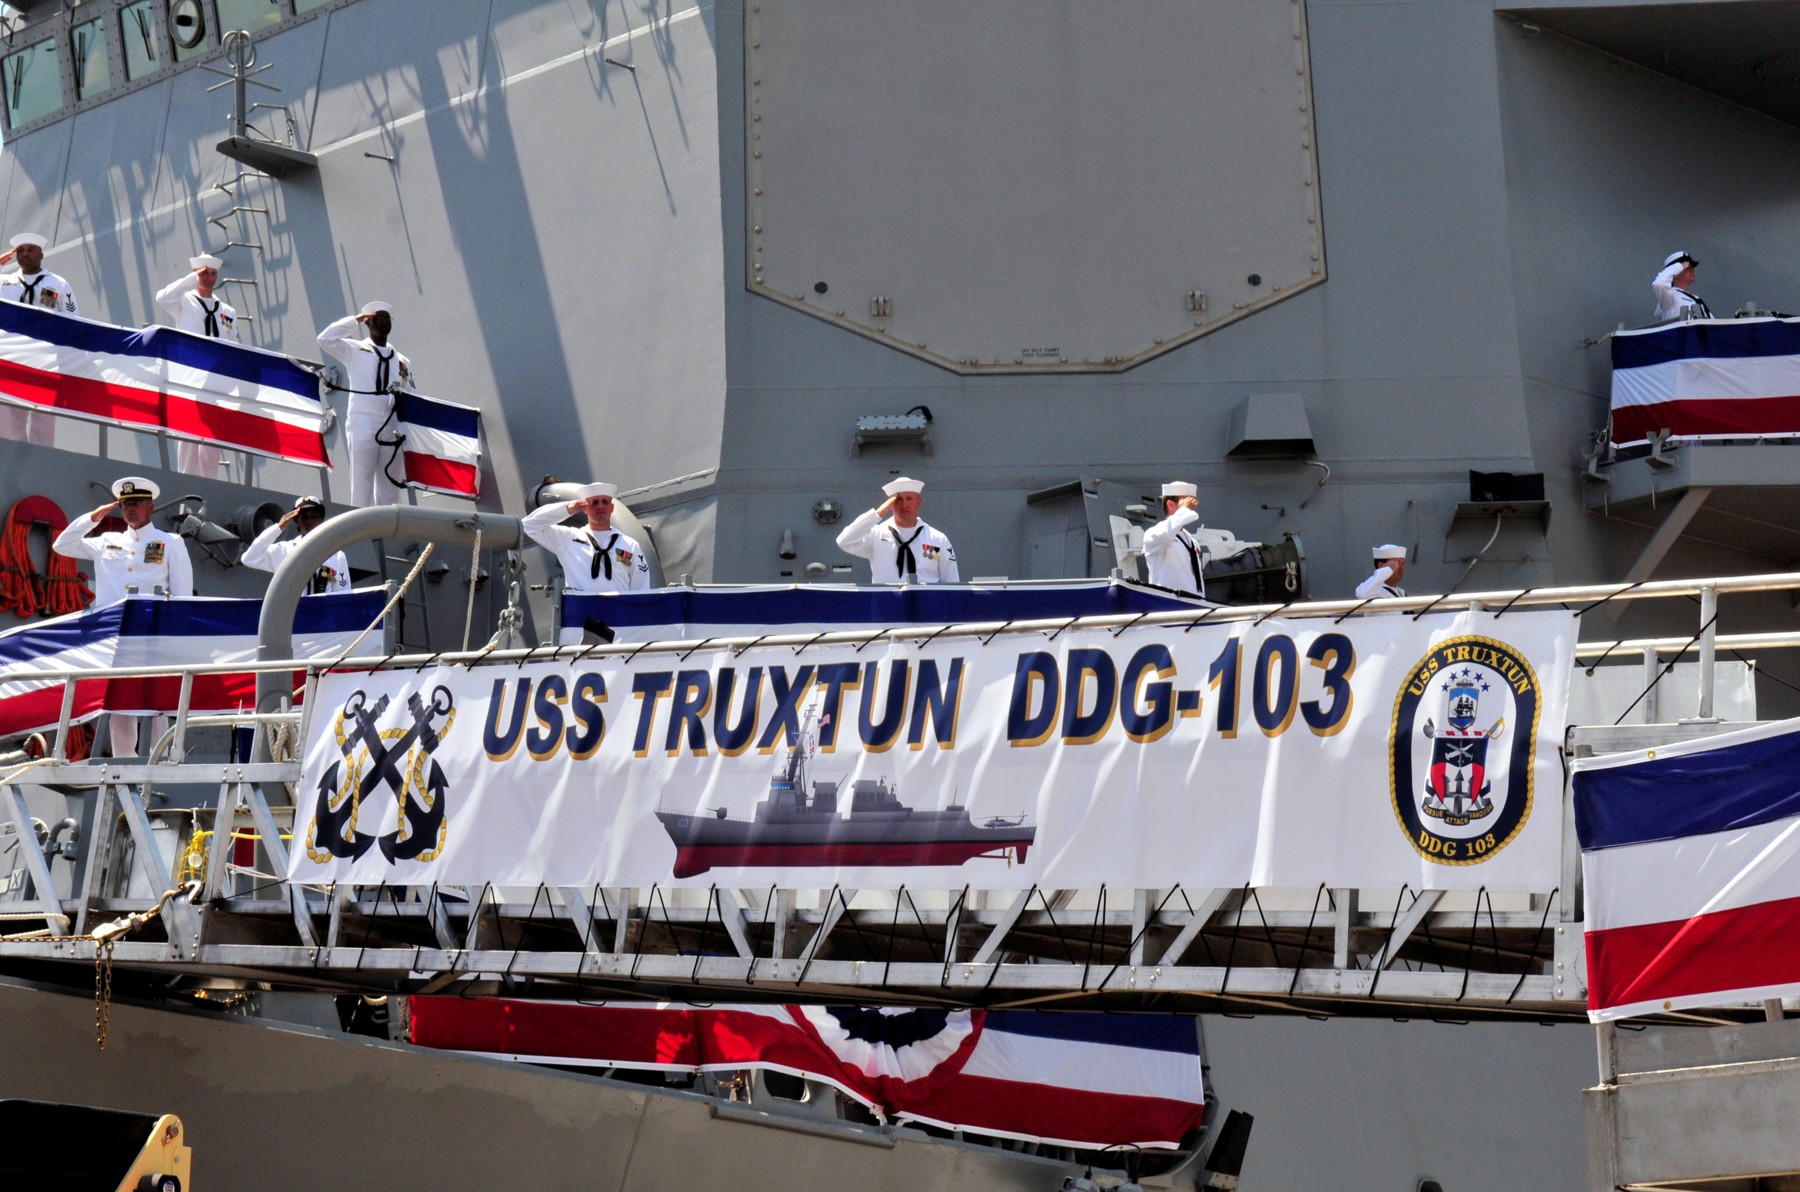 ddg-103 uss truxtun arleigh burke class guided missile destroyer aegis us navy commissioning 2009 charleston south carolina 66